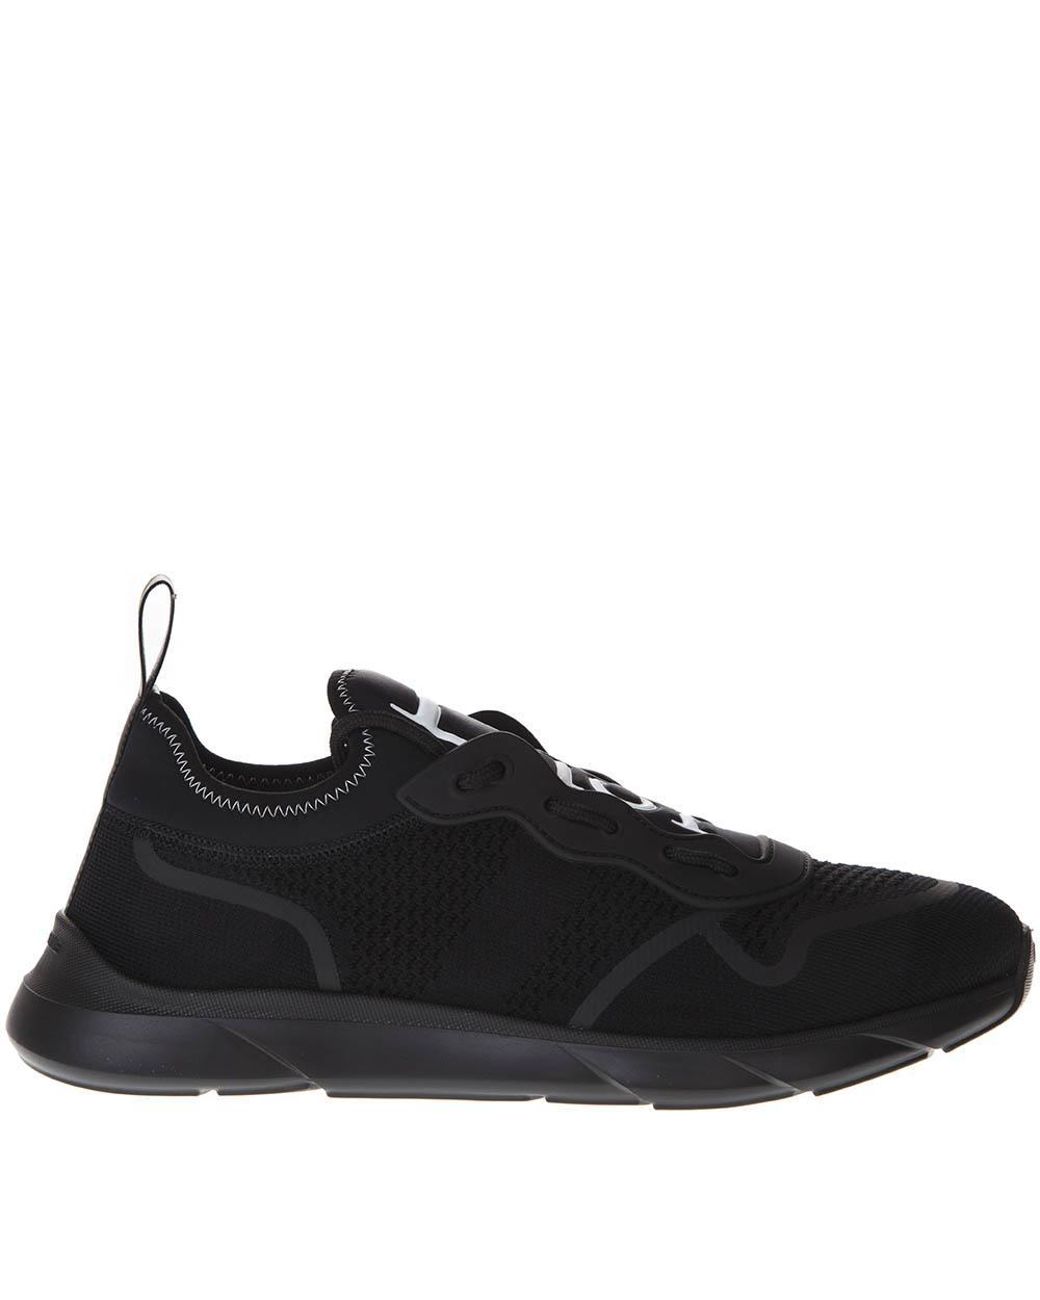 Dior Homme B21 Neo Sneakers in Black for Men | Lyst